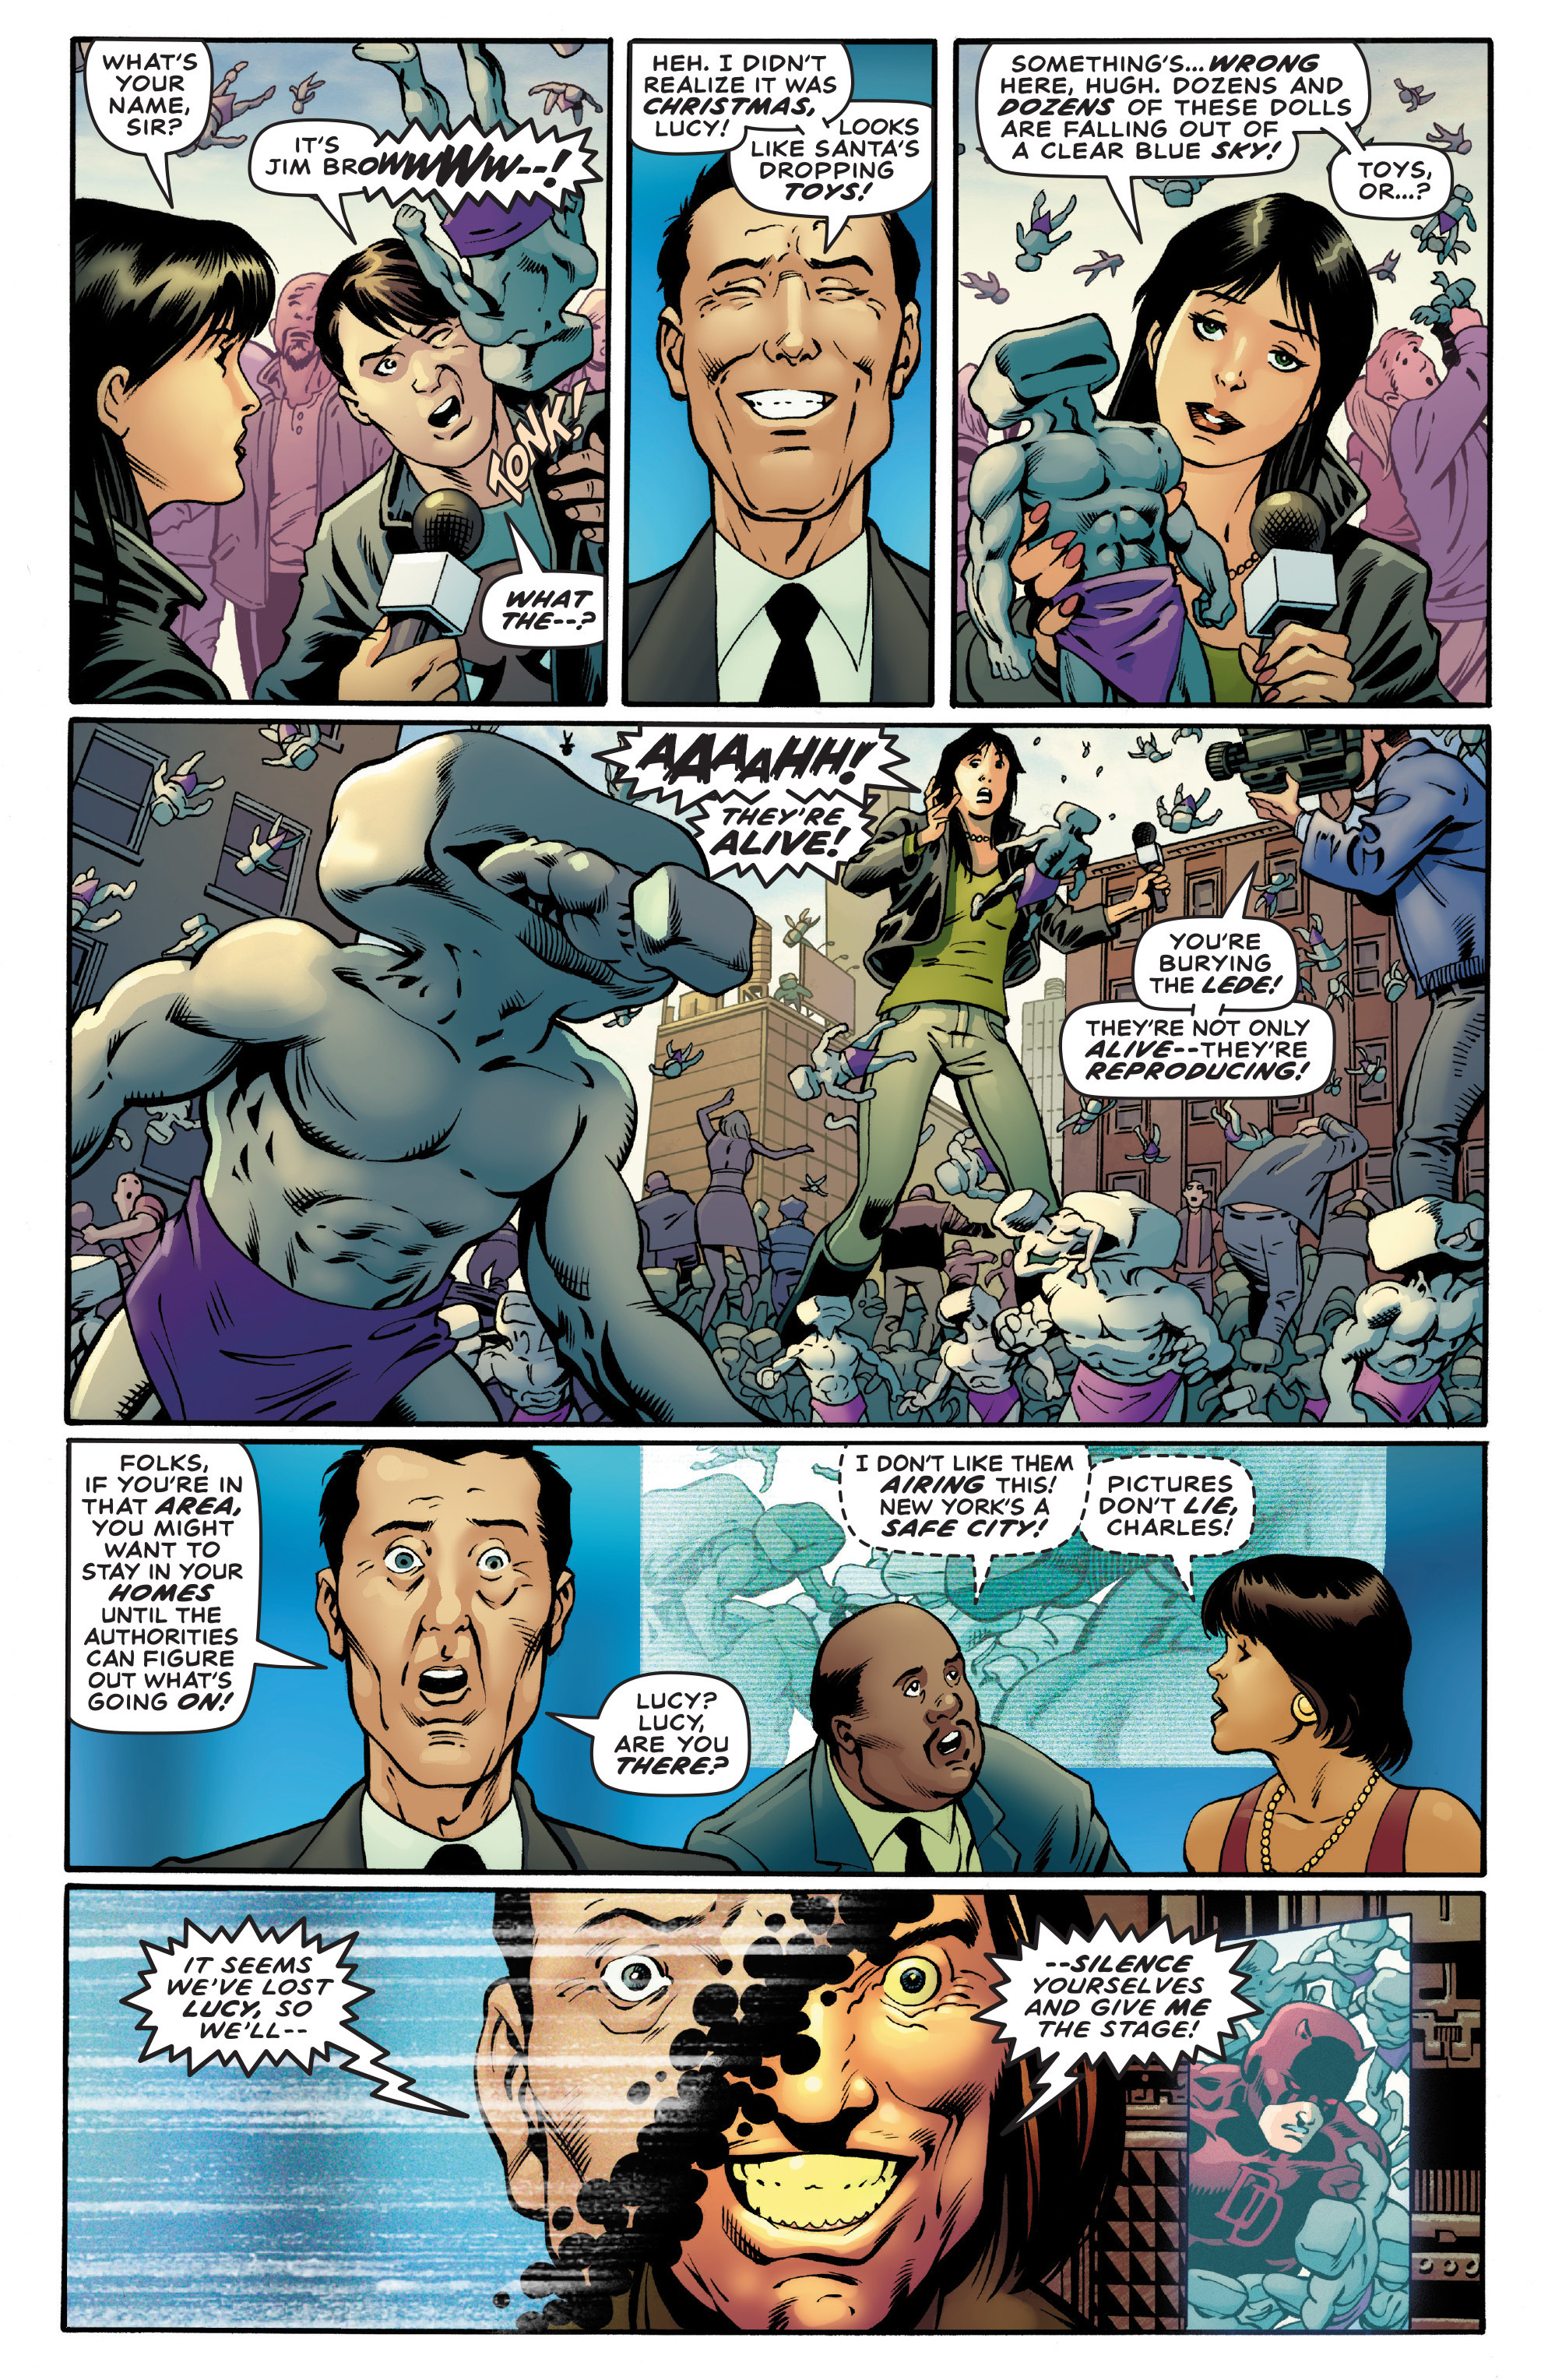 Avengers (2016-): Chapter 3.1 - Page 4